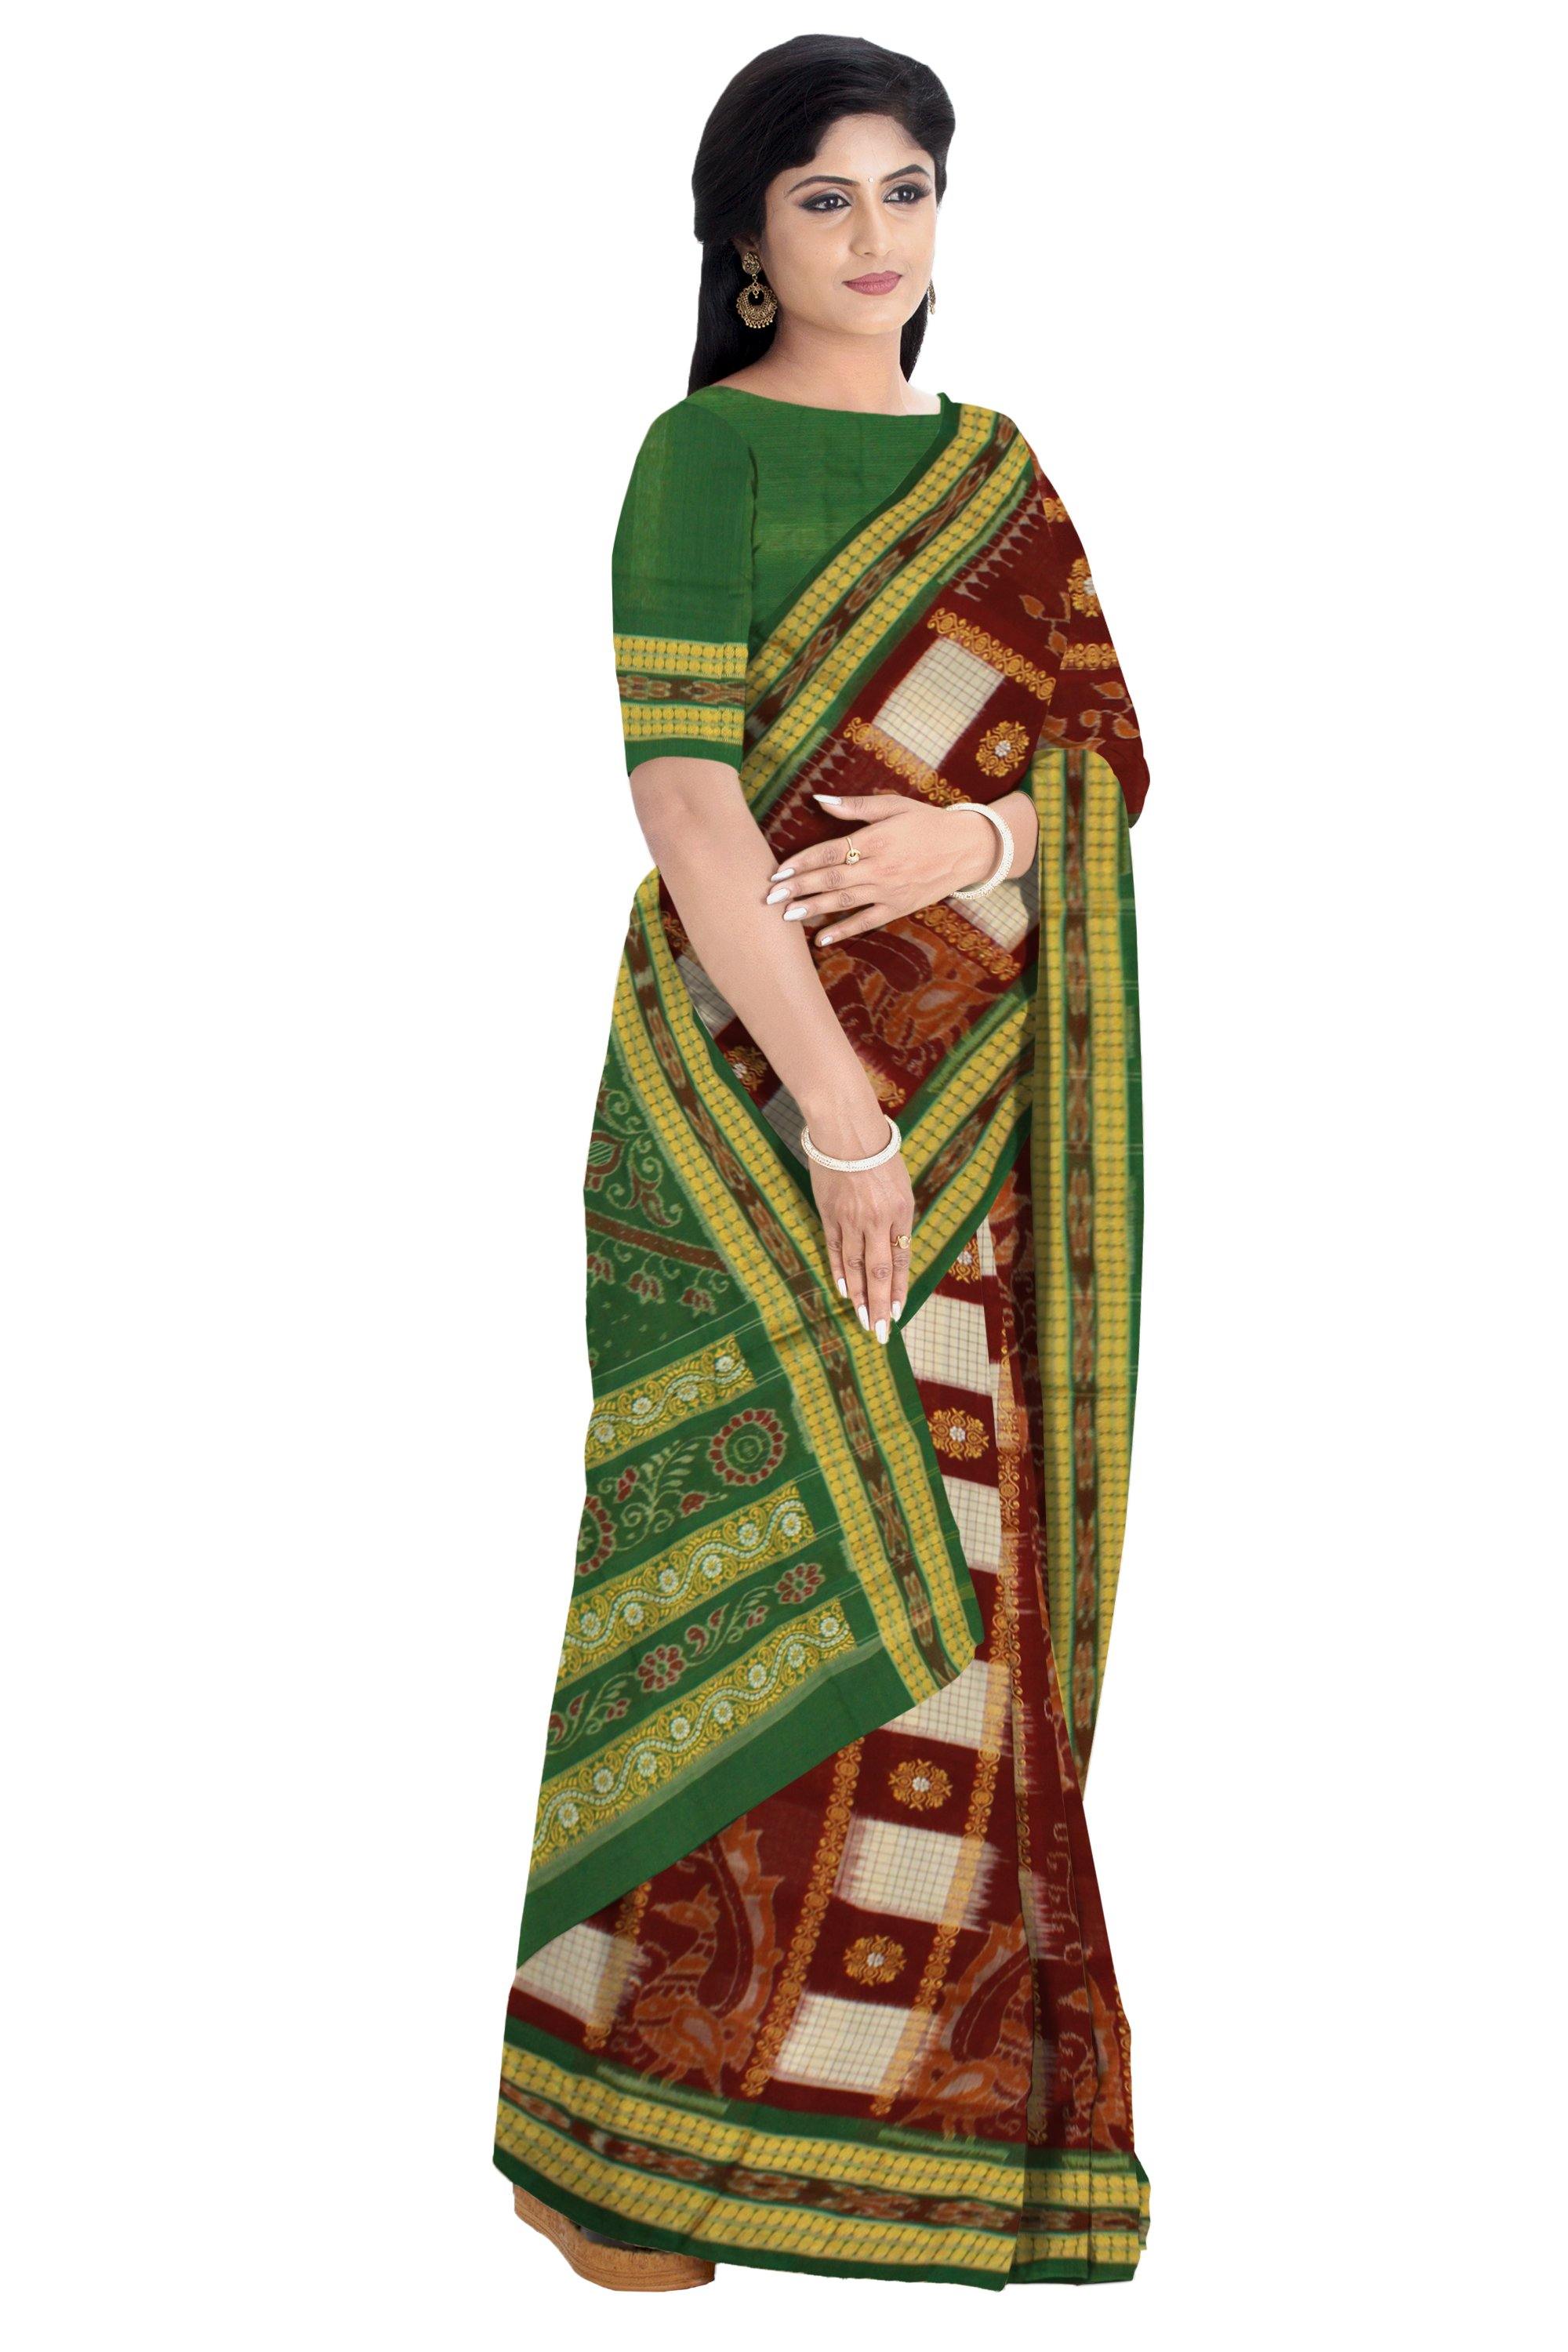 Authentic Sambalpuri  Box pattern Saree with Flower Bomkei Pattern body in maroon color and green in pallu ( with Blouse Piece) - Koshali Arts & Crafts Enterprise